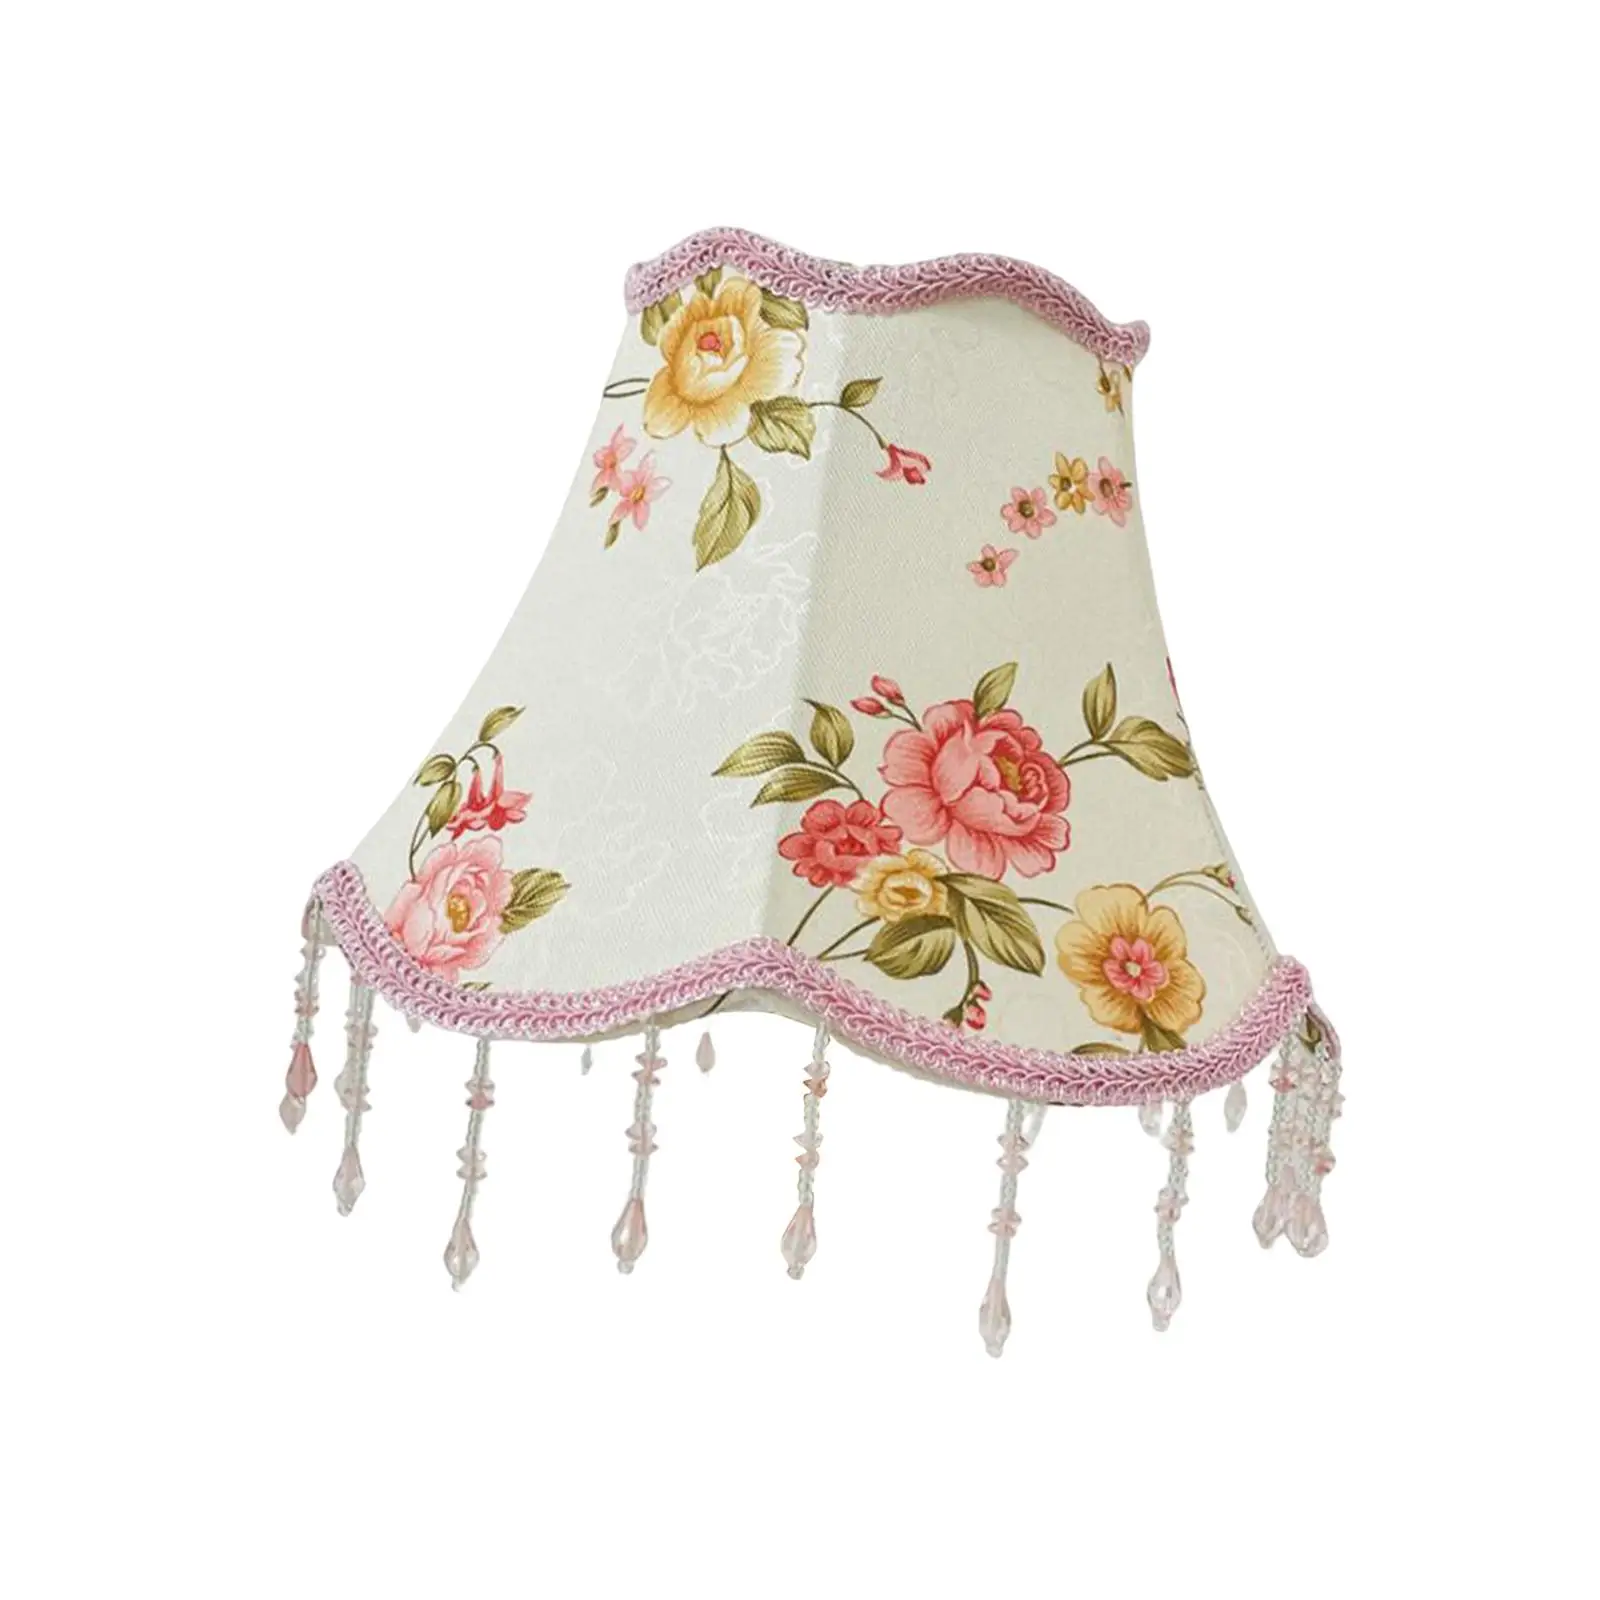 Lamp Shade with Fringe with Beads Decorative Table Lamp Cover E27 Base Fabric Lampshade for Home Office Restaurant Dining Room